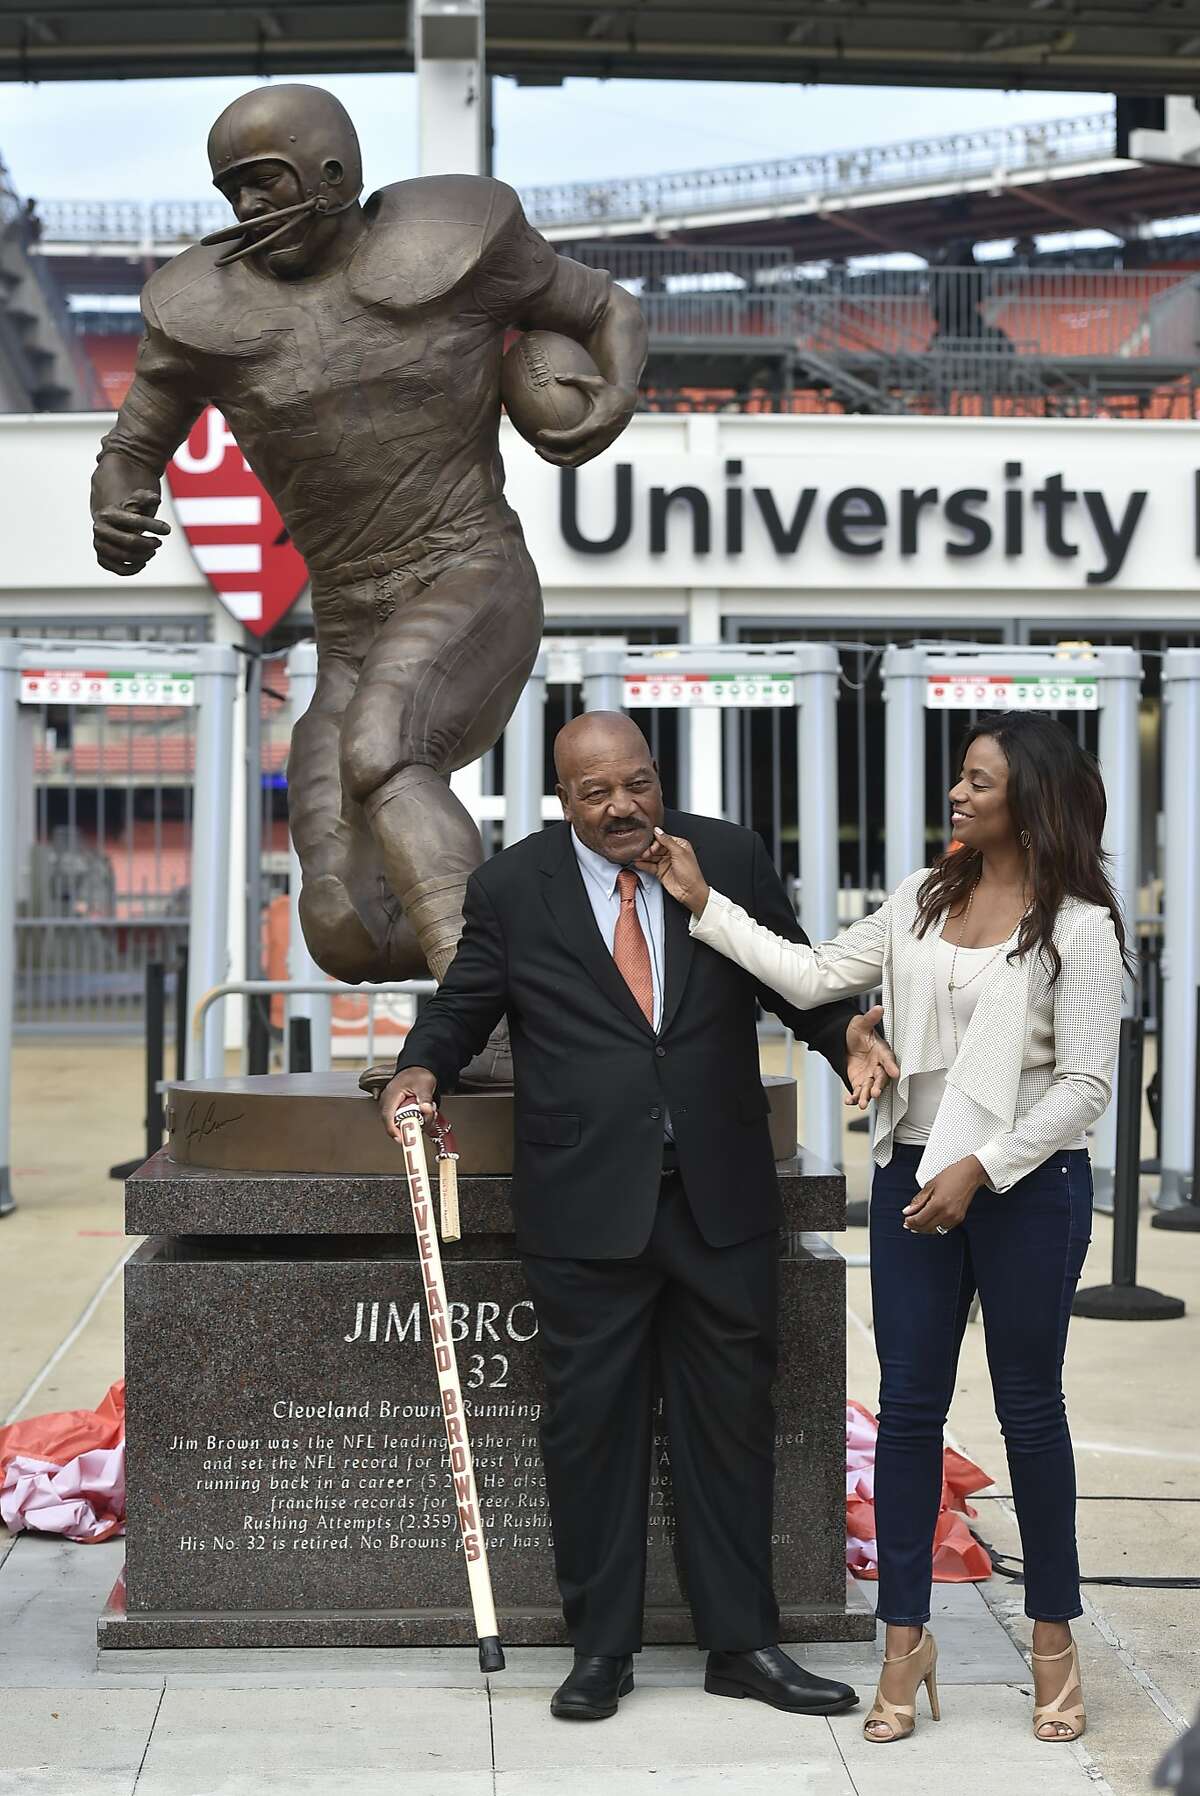 Cleveland Browns Pro Football Hall of Famer Jim Brown, center, and his wife Monique, right, is honored with a ceremony and statue outside FirstEnergy Stadium before an NFL football game against the Baltimore Ravens, Sunday, Sept. 18, 2016, in Cleveland. (AP Photo/David Richard)